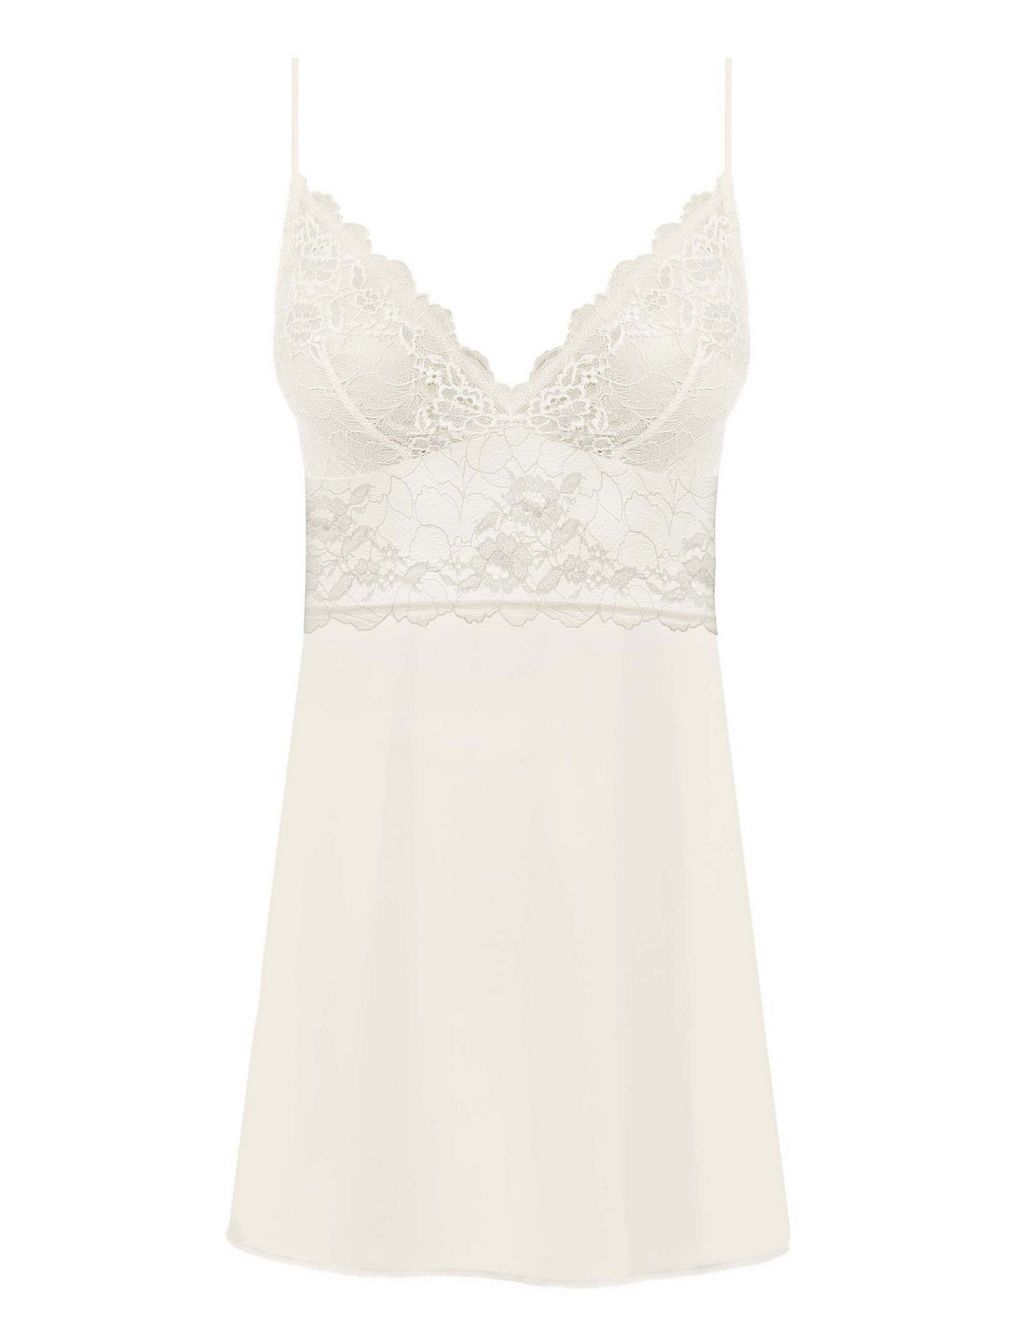 Lace Perfection Chemise | Wacoal | M&S